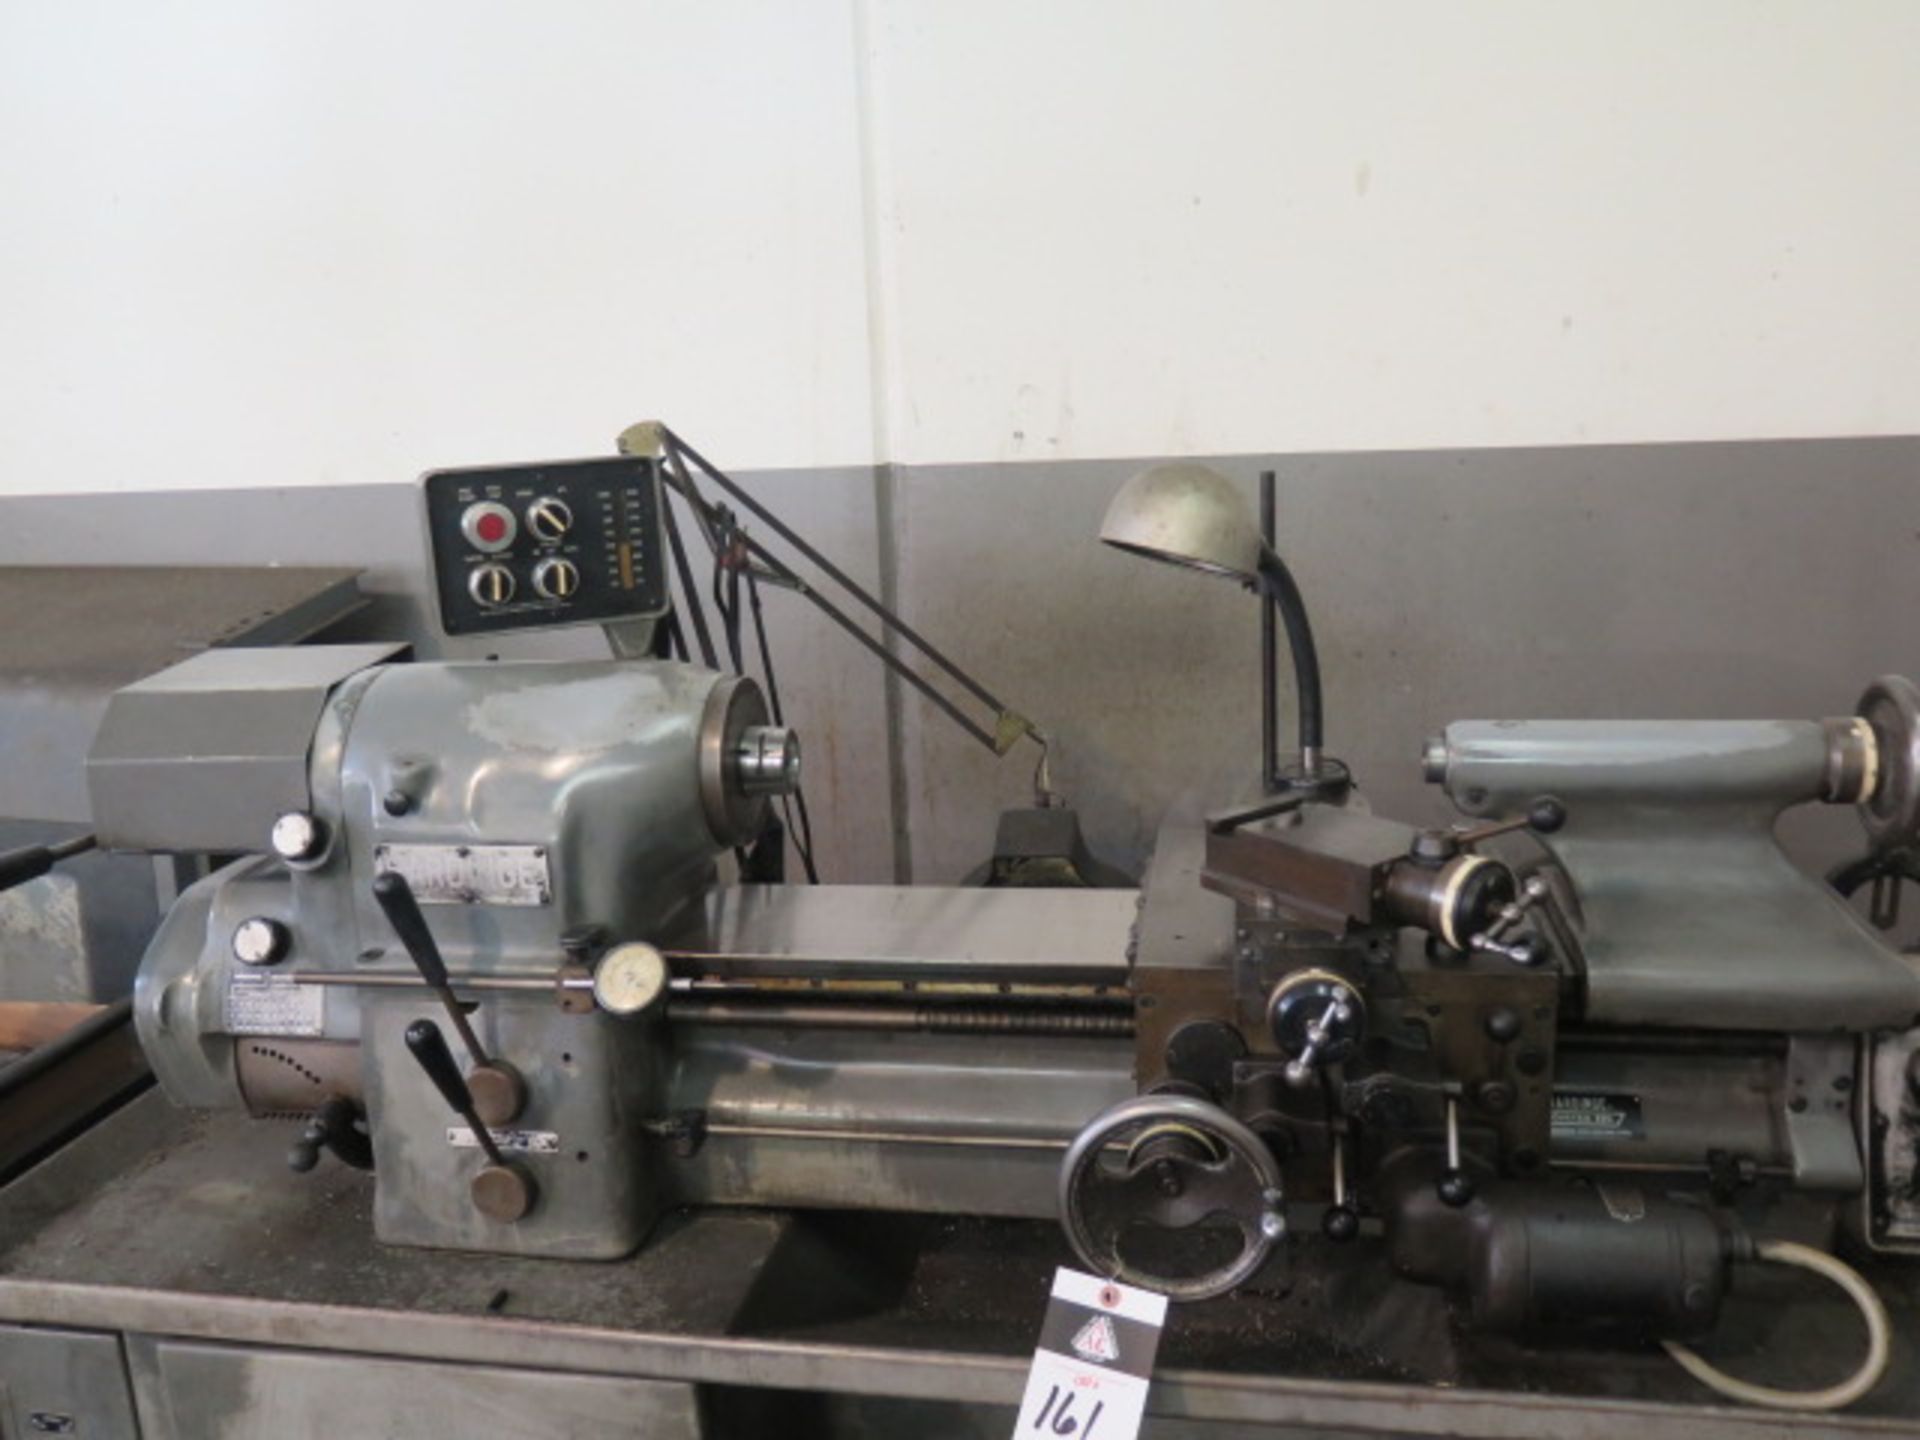 Hardinge HLV-H Wide Bed Tool Room Lathe w/ 125-3000 RPM, Inch Threading, Power Feed, Tailstock, - Image 2 of 8